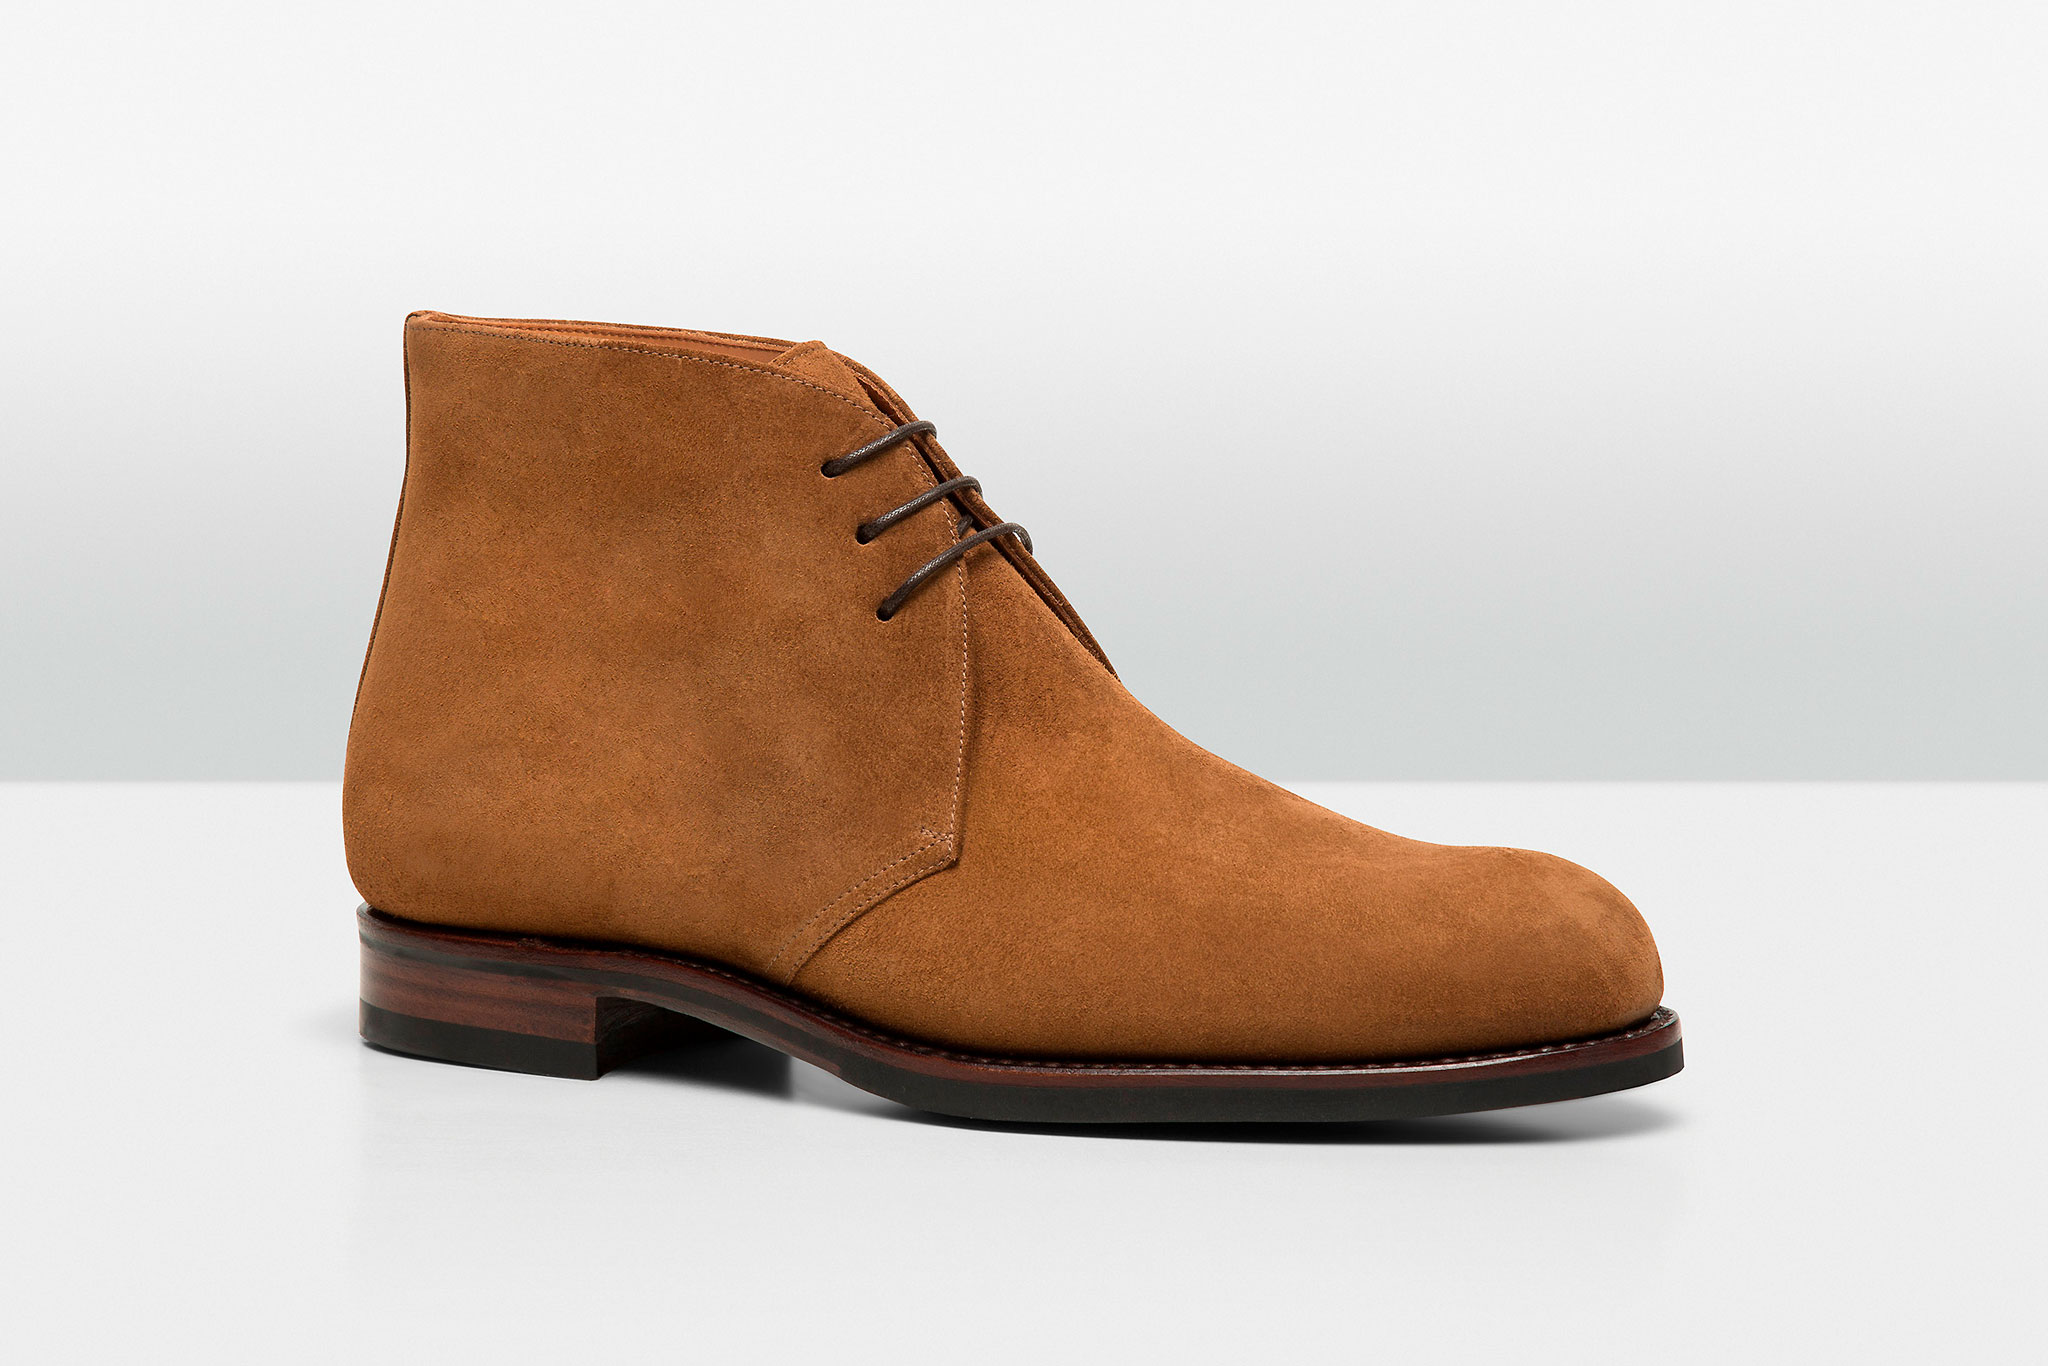 Buy > light brown polo boots > in stock